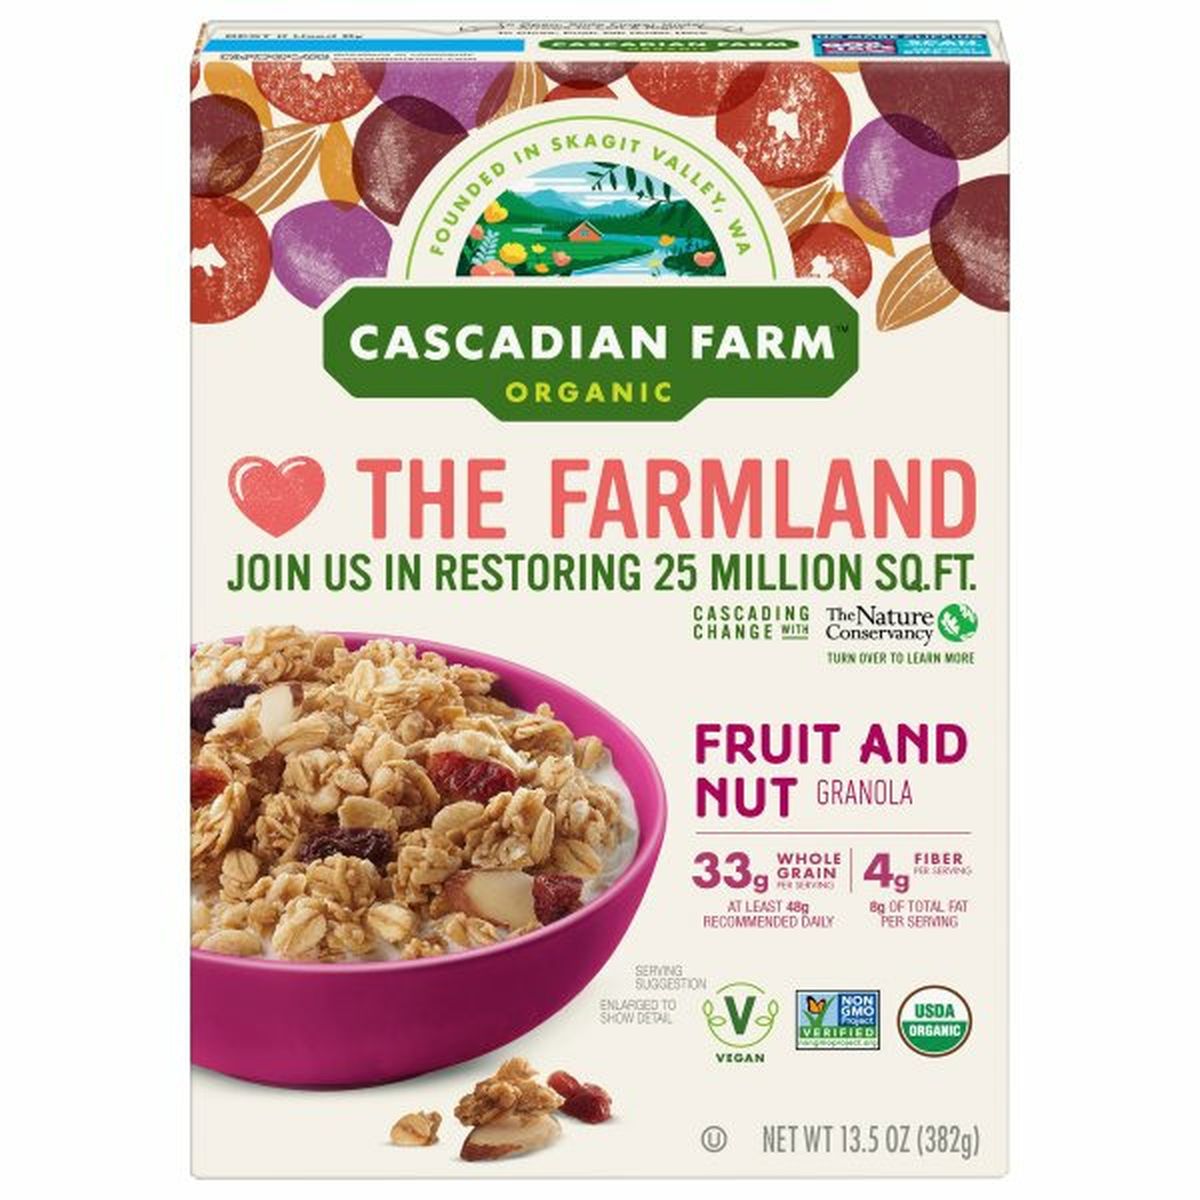 Calories in Cascadian Farm Organic Granola, Fruit and Nut